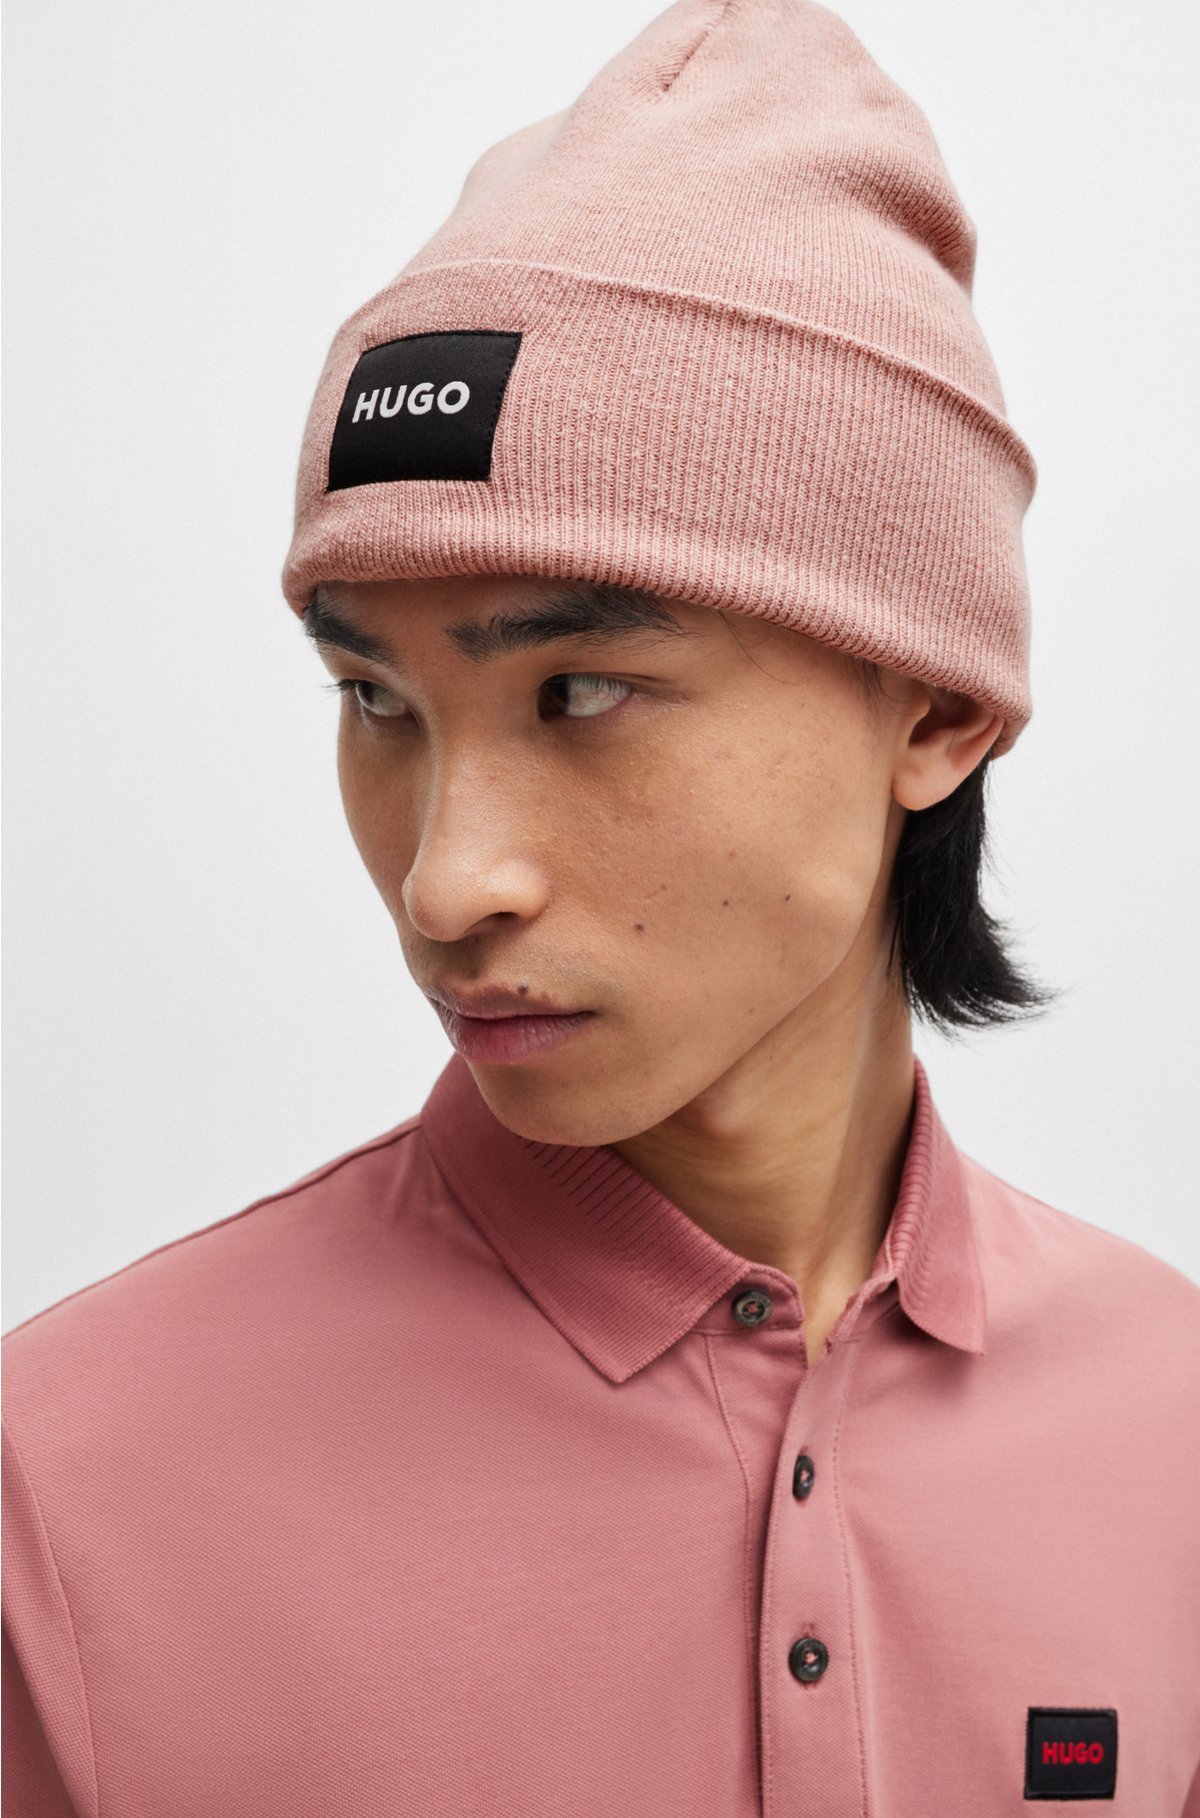 Knitted beanie hat with logo detail, light pink